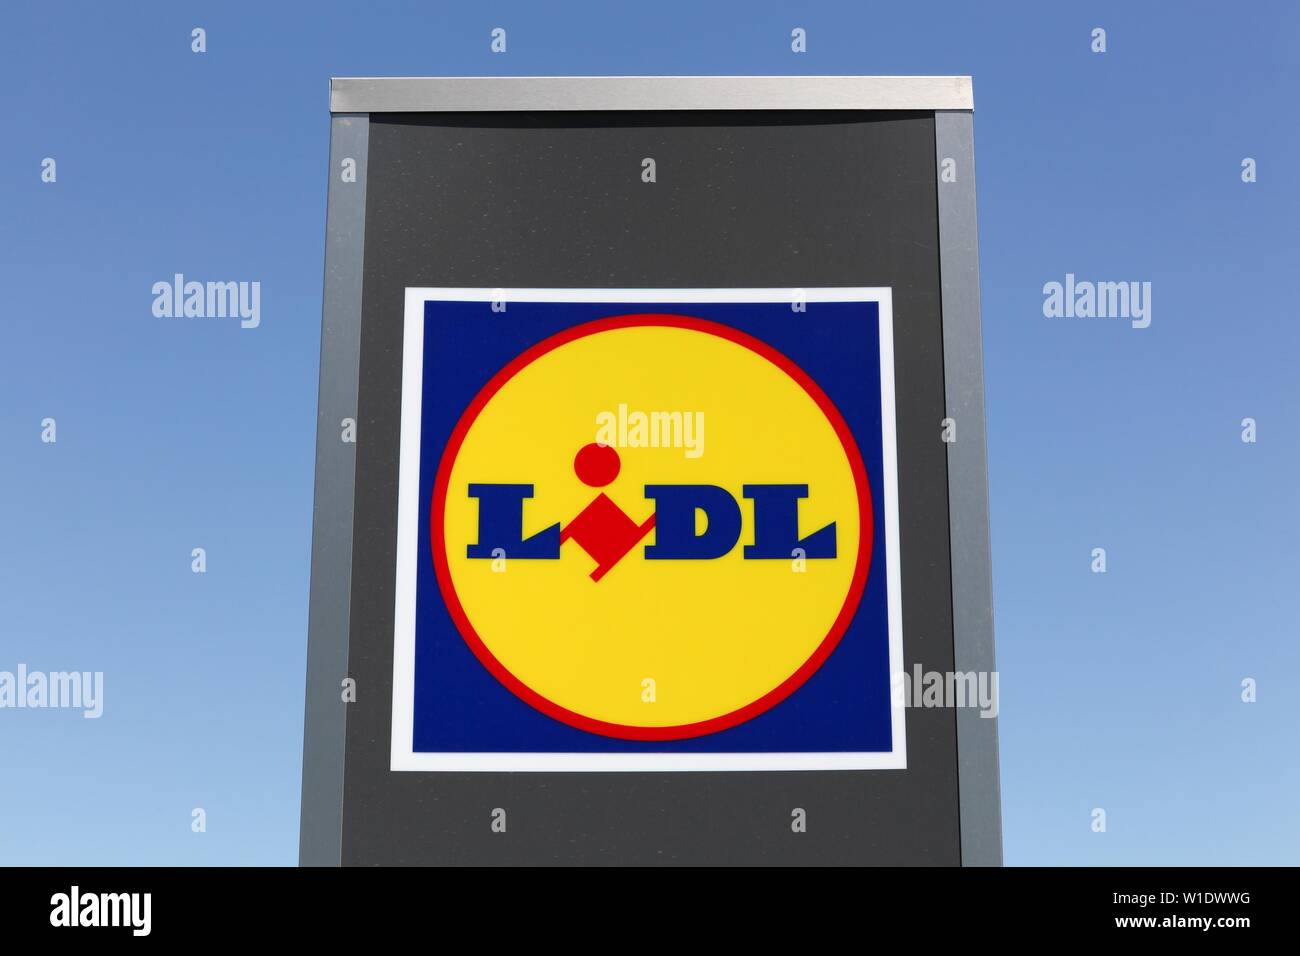 Decines, France - June 13, 2019: Lidl logo on a panel. Lidl is a german global discount supermarket chain that operates over 10 000 stores Stock Photo